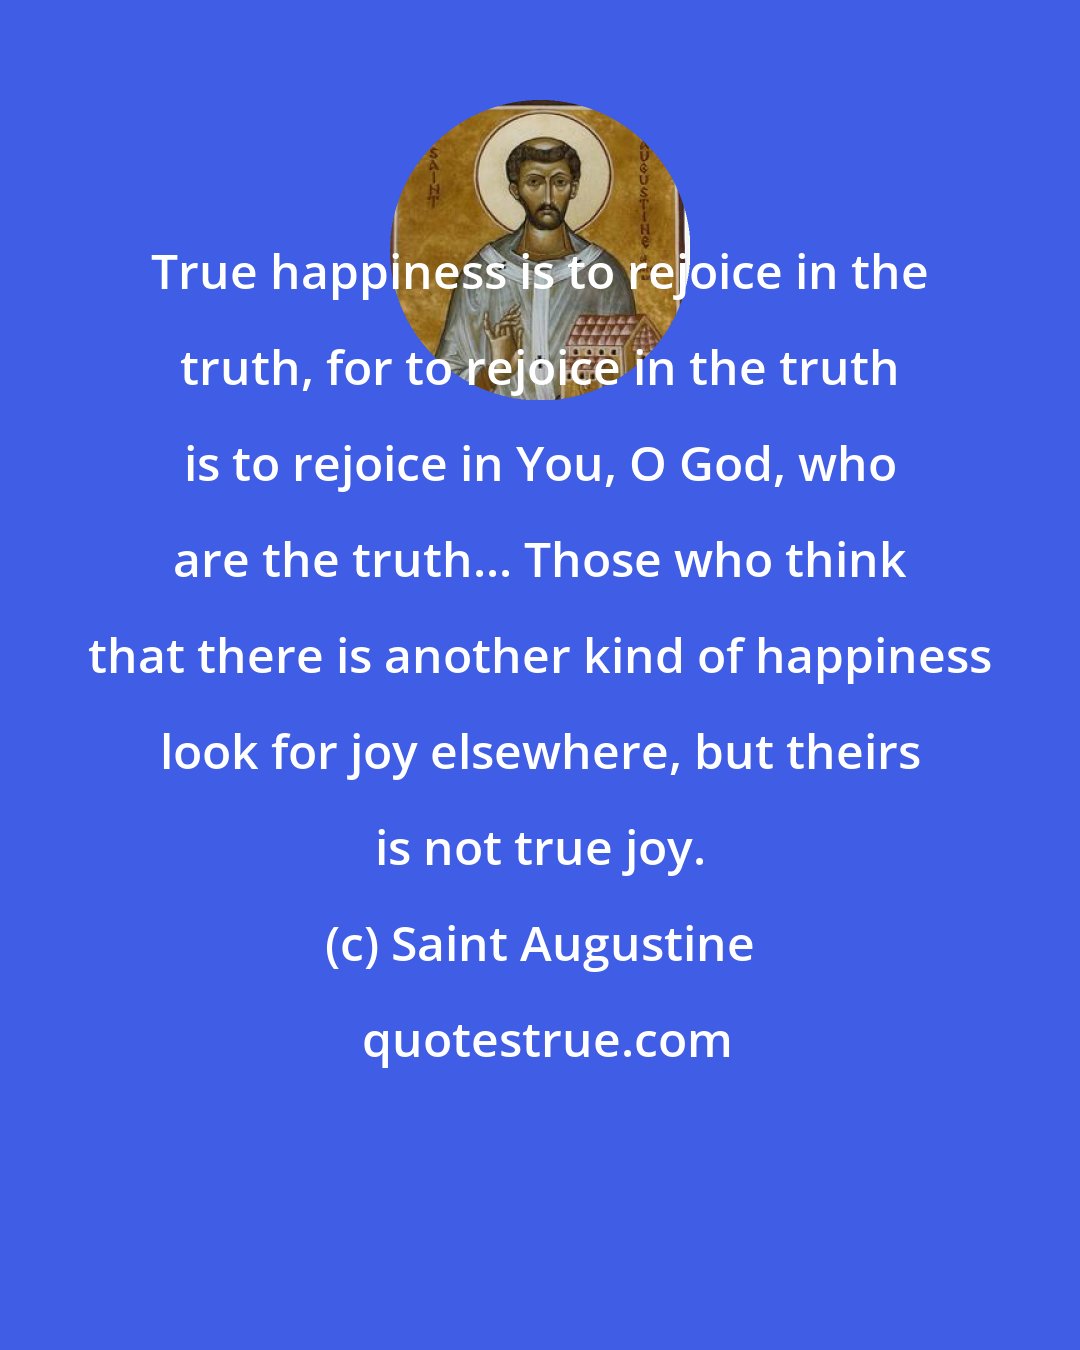 Saint Augustine: True happiness is to rejoice in the truth, for to rejoice in the truth is to rejoice in You, O God, who are the truth... Those who think that there is another kind of happiness look for joy elsewhere, but theirs is not true joy.